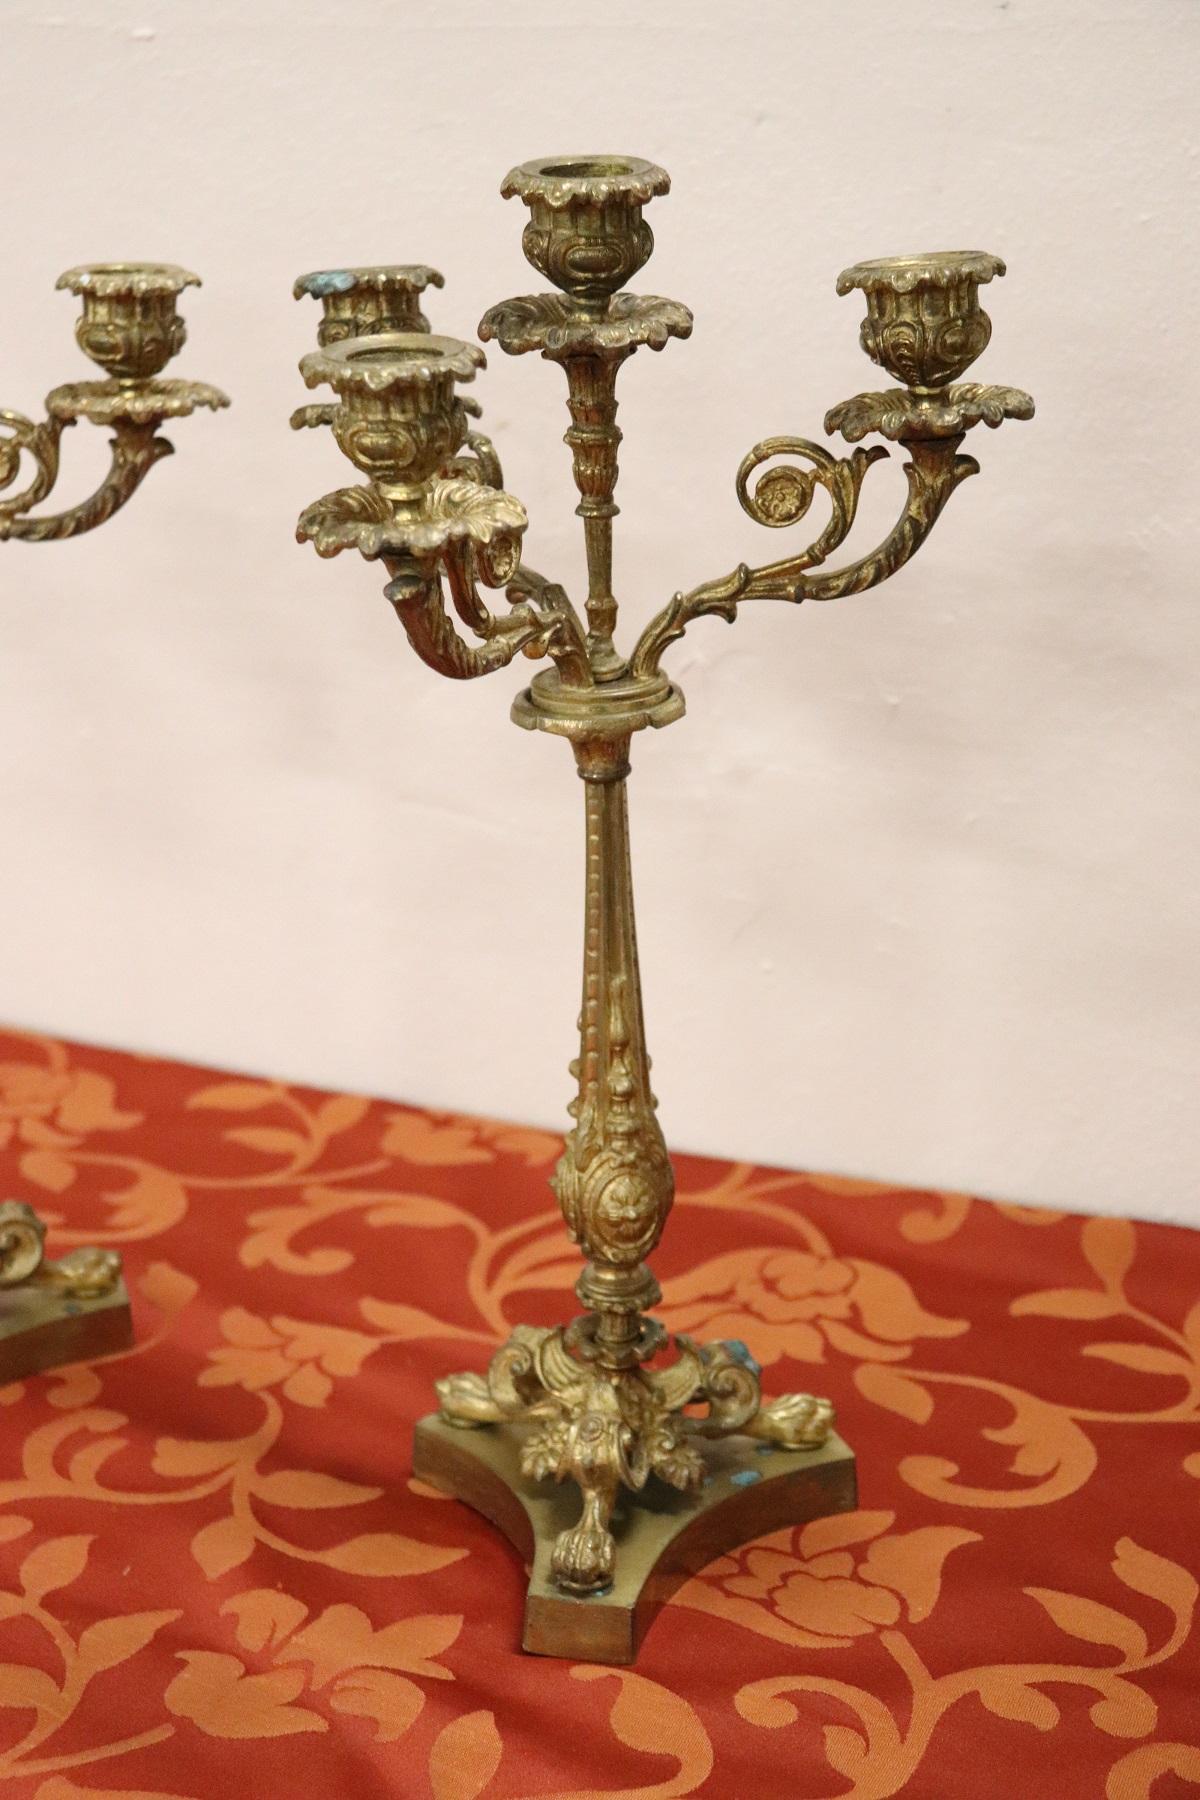 A particular pair of antique French Napoleon III candelabras in gilded bronze 4 arms. The bronze is finely chiselled decoration of great quality at the base of the lion's paw feet. Beautiful to decorate an important salon.